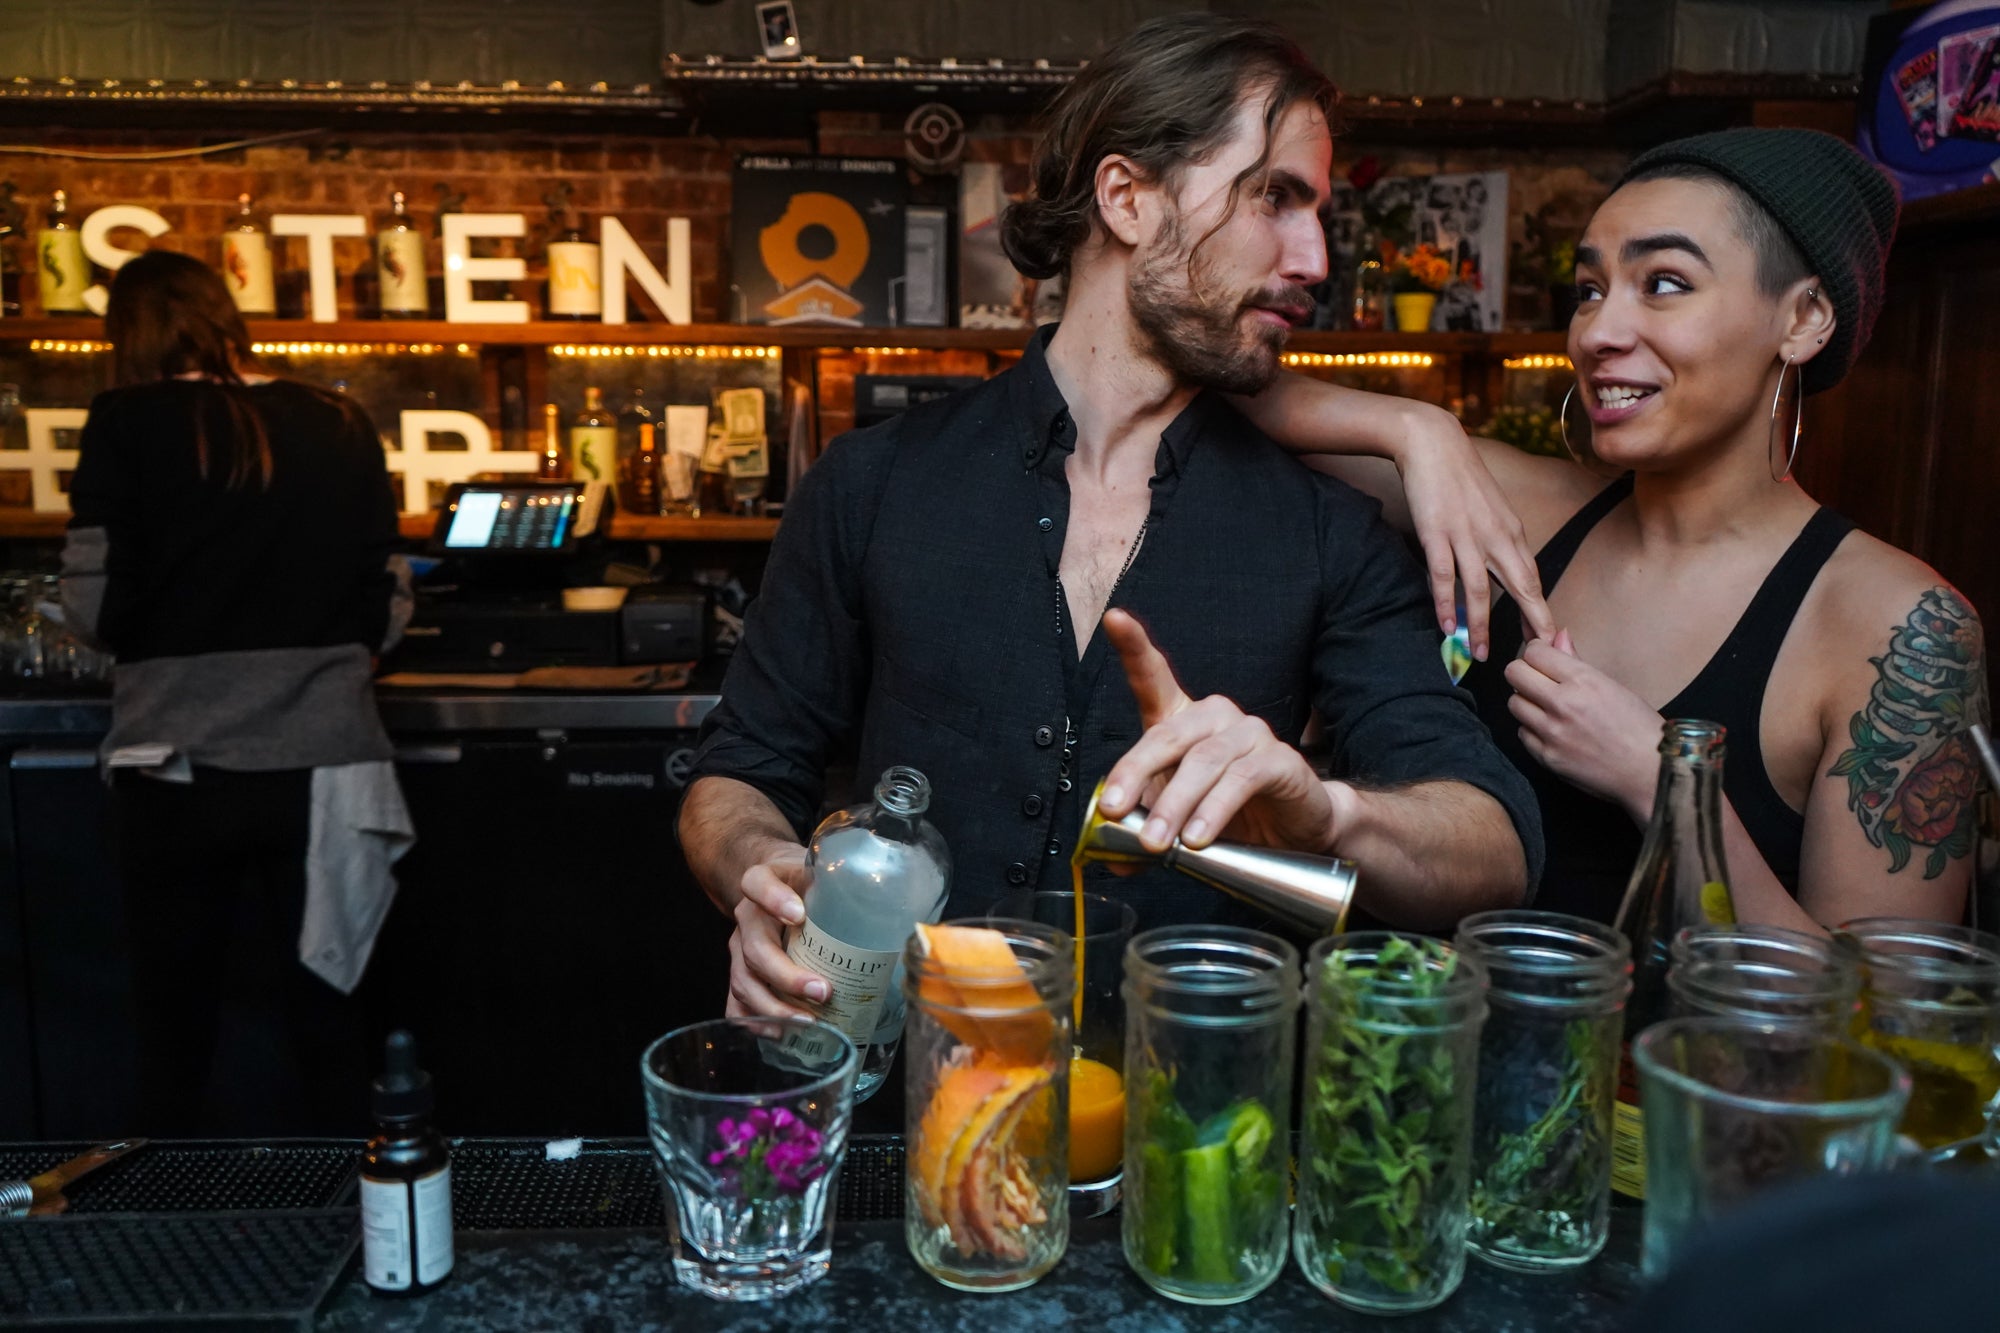 Alcohol-free bars and events are popping up all over NYC